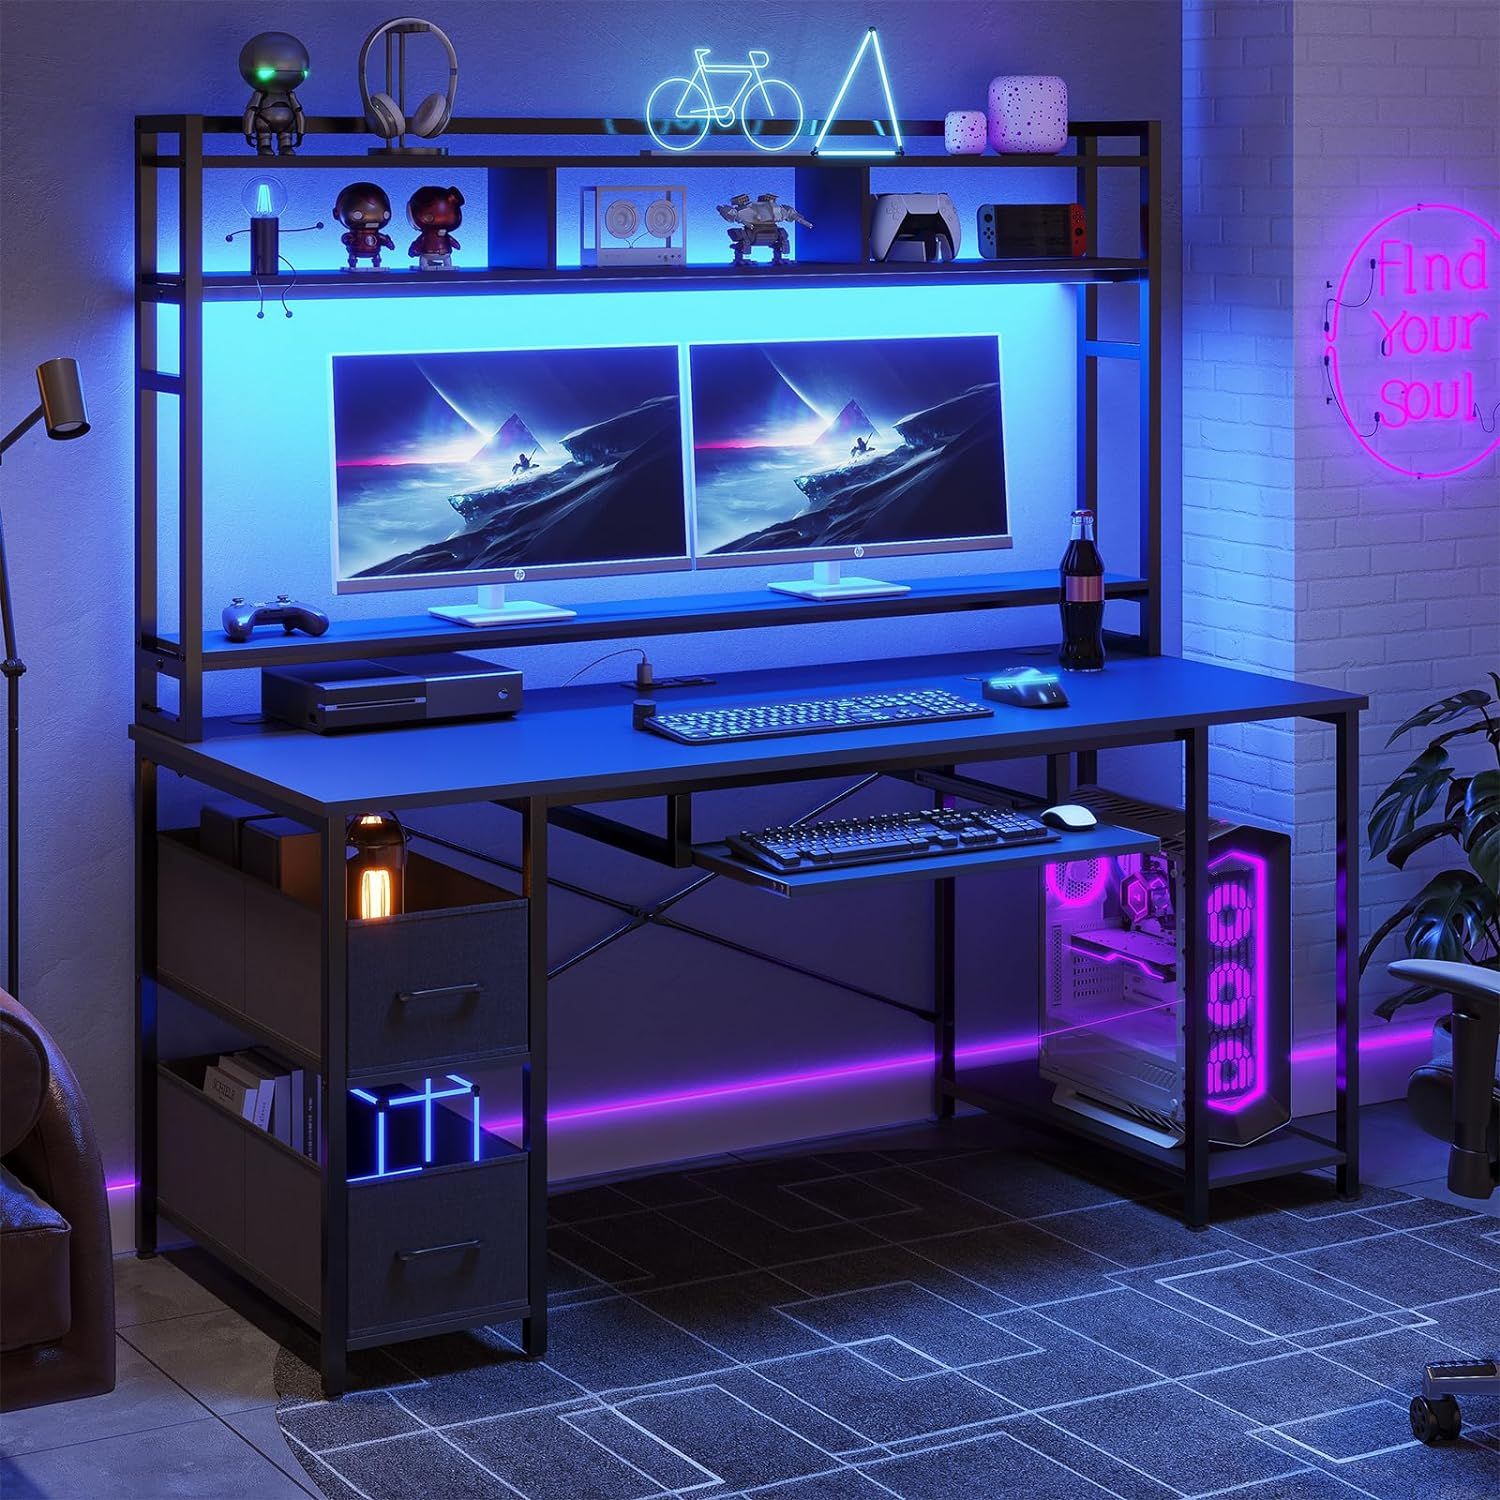 SEDETA 55-inch Gaming Computer Desk with LED Lights